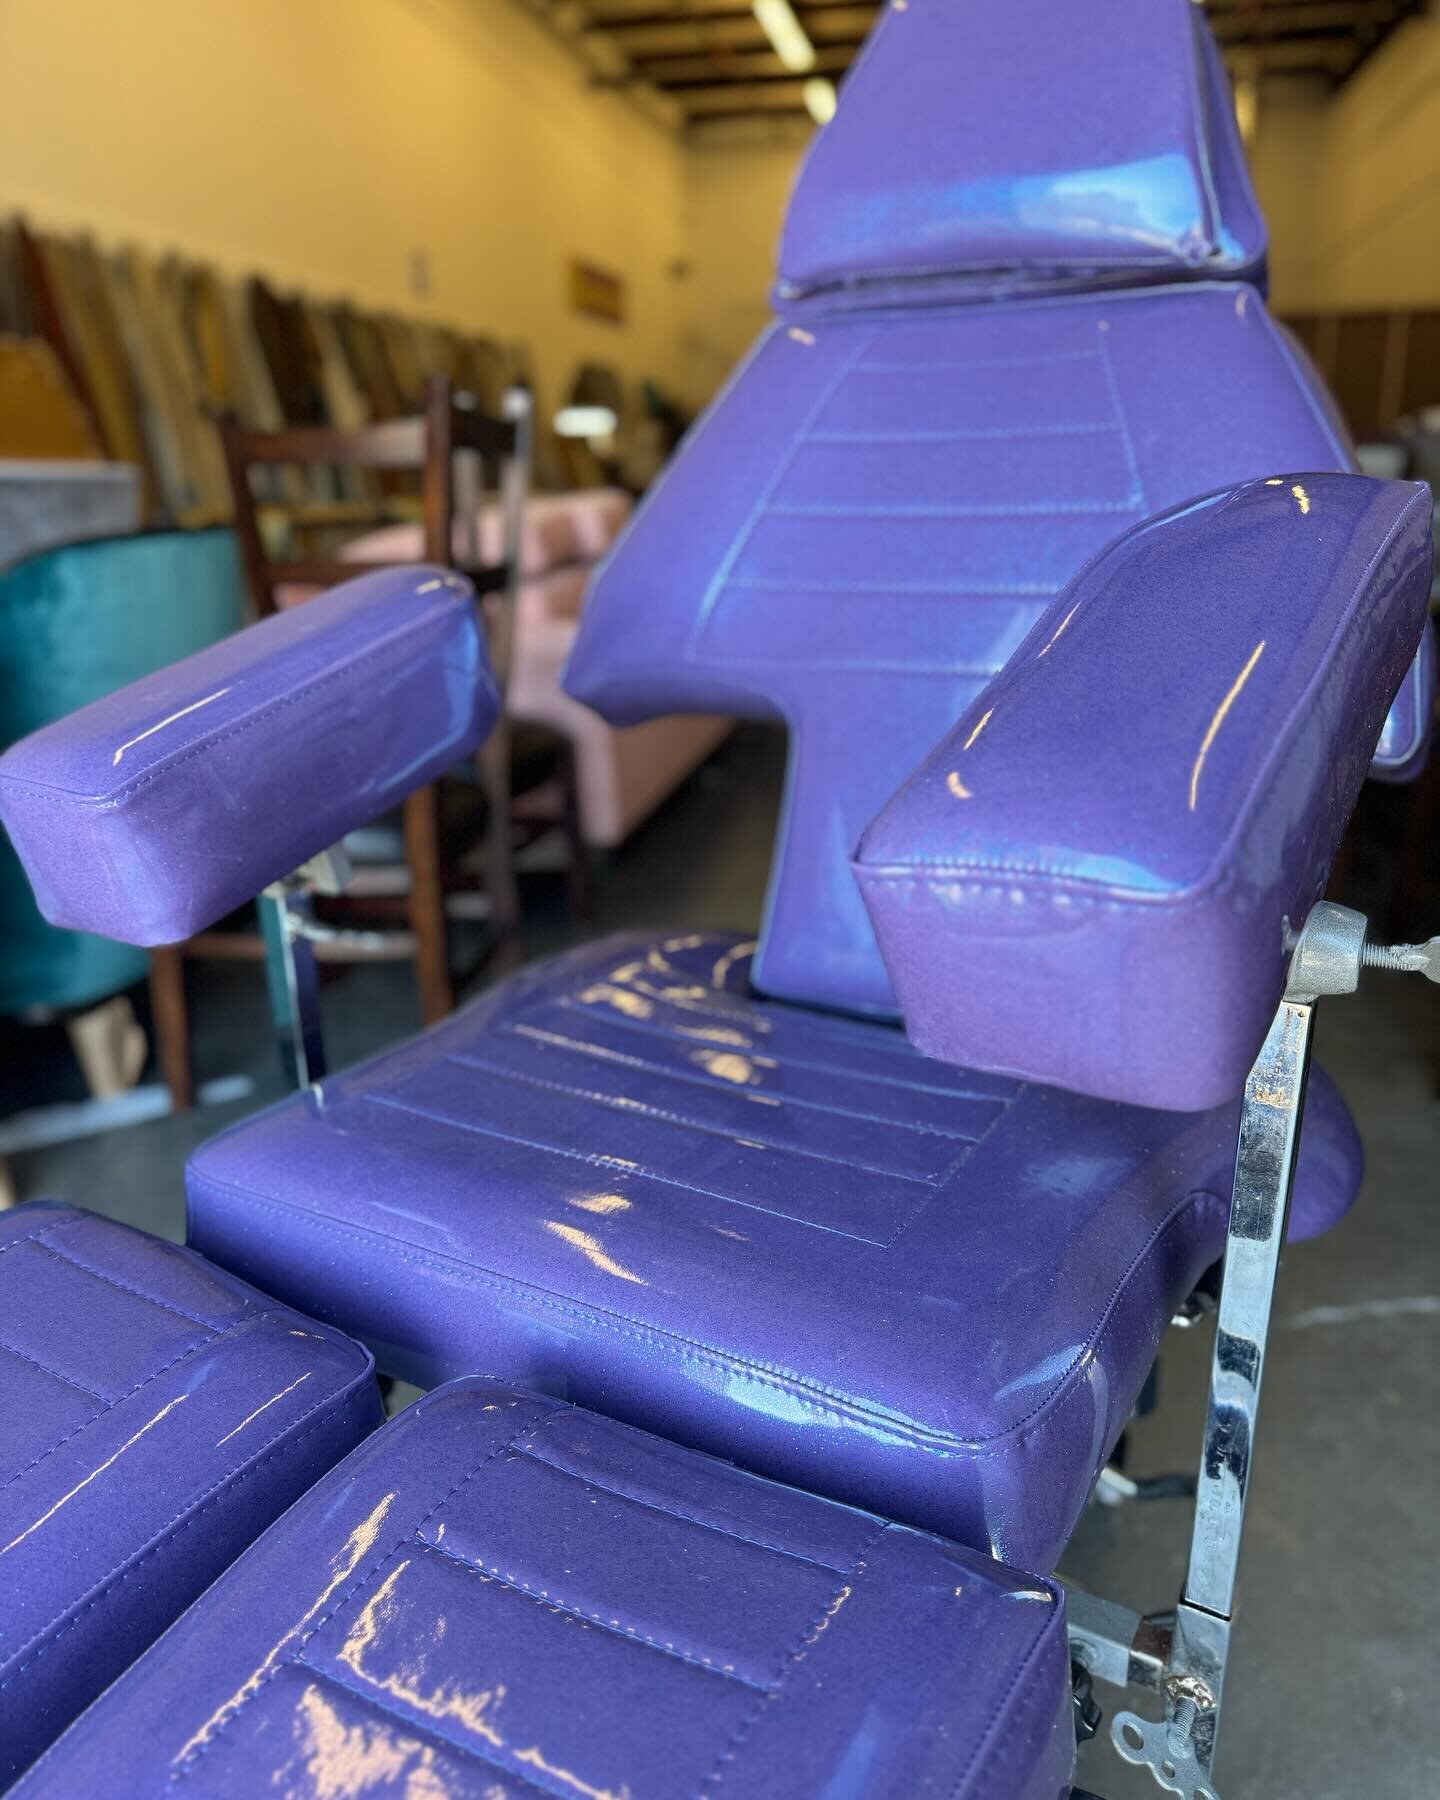 We get to be a part of a lot of unique projects. Like this eye catching tattoo chair finished in popping purple. If you are going to leave your mark, might as well do it in style! 🔥

#design #customupholstery #upholstery #tattoo #nashville #coolspri